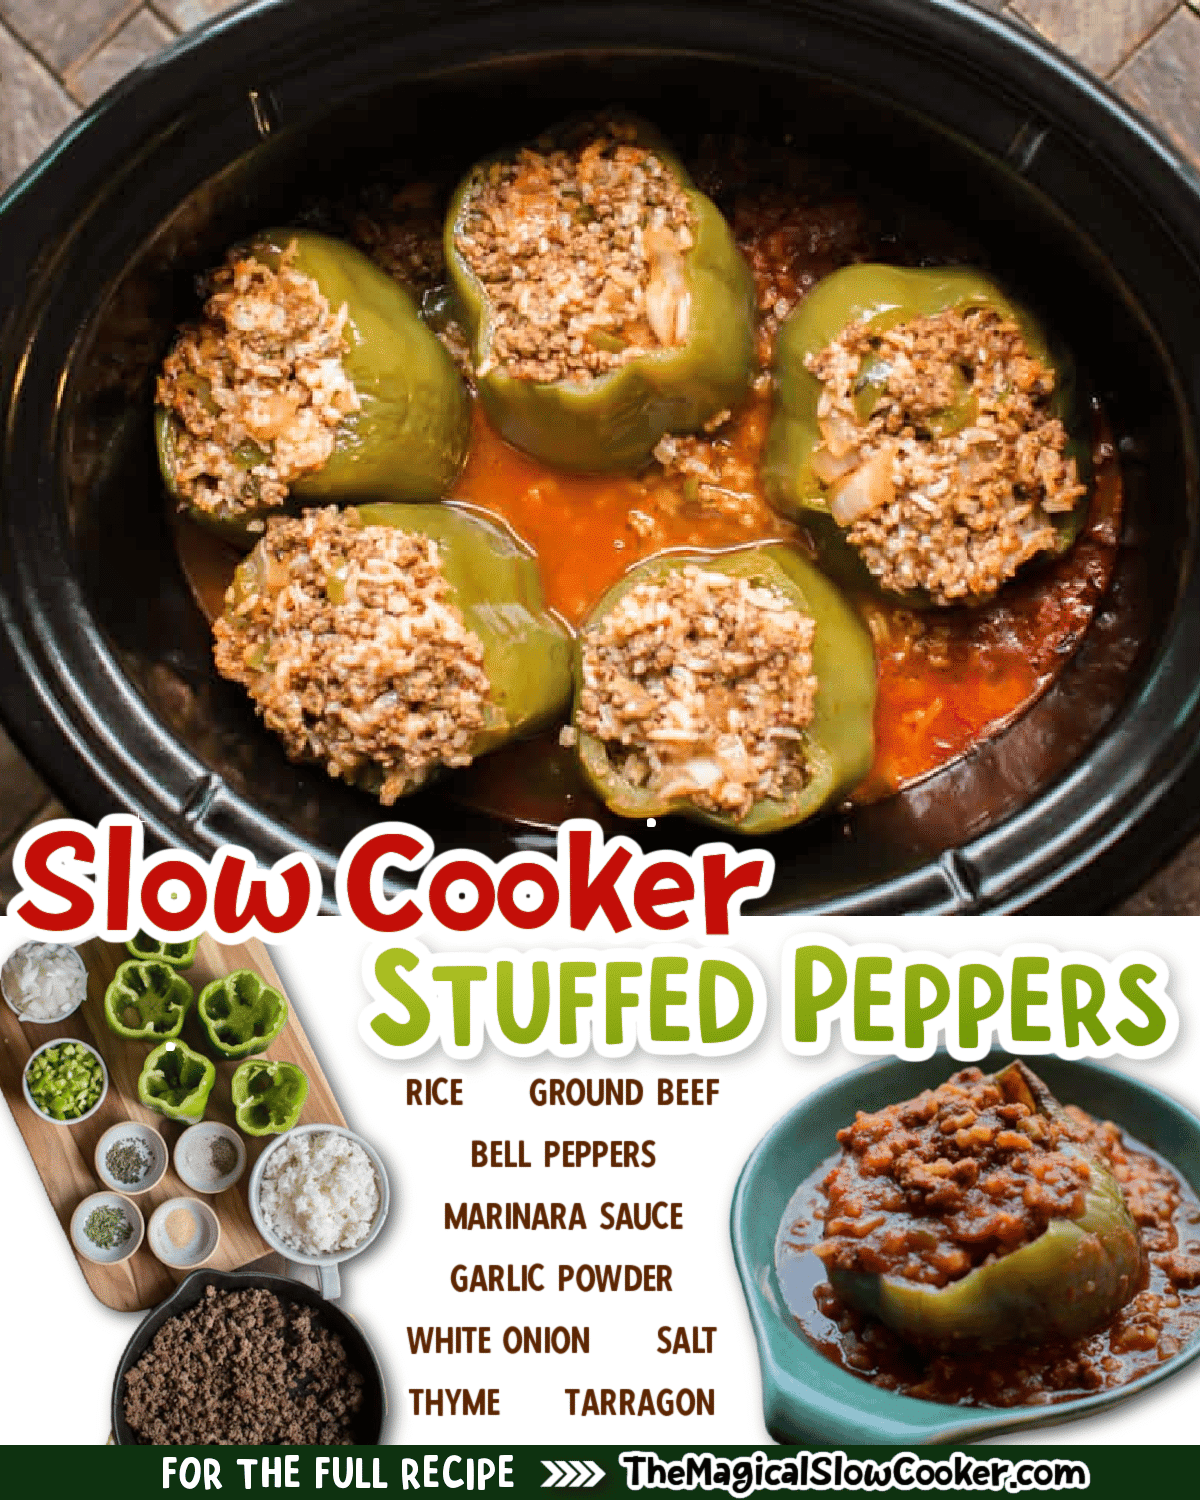 Images of stuffed peppers with text overlay of what the ingredients are.